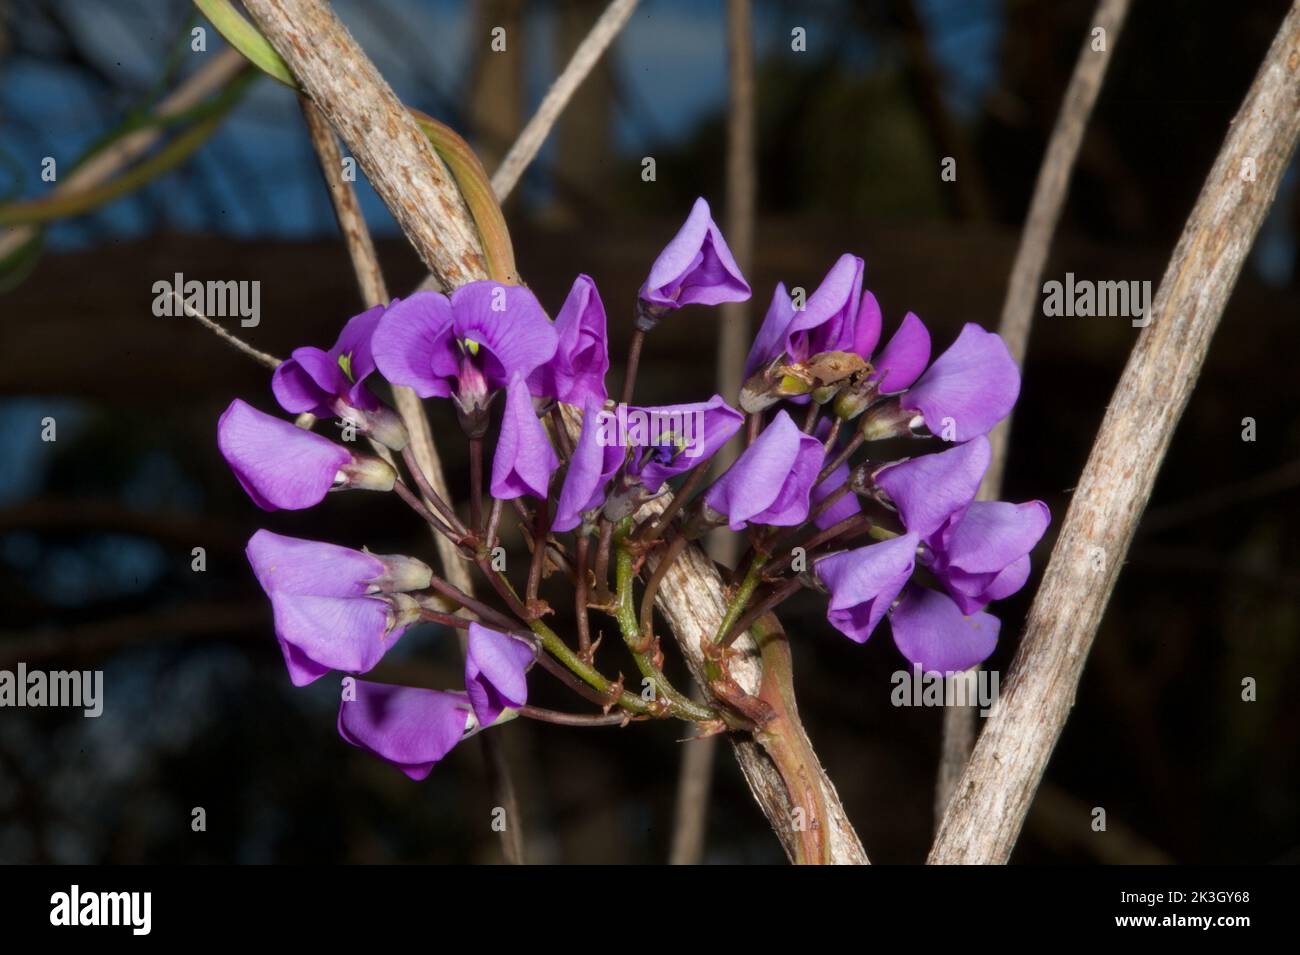 The Hardenbergia Violacea (False Sarsparilla) was having a really good start to Spring this year. The cool, wet weather had reduced the competition. Stock Photo